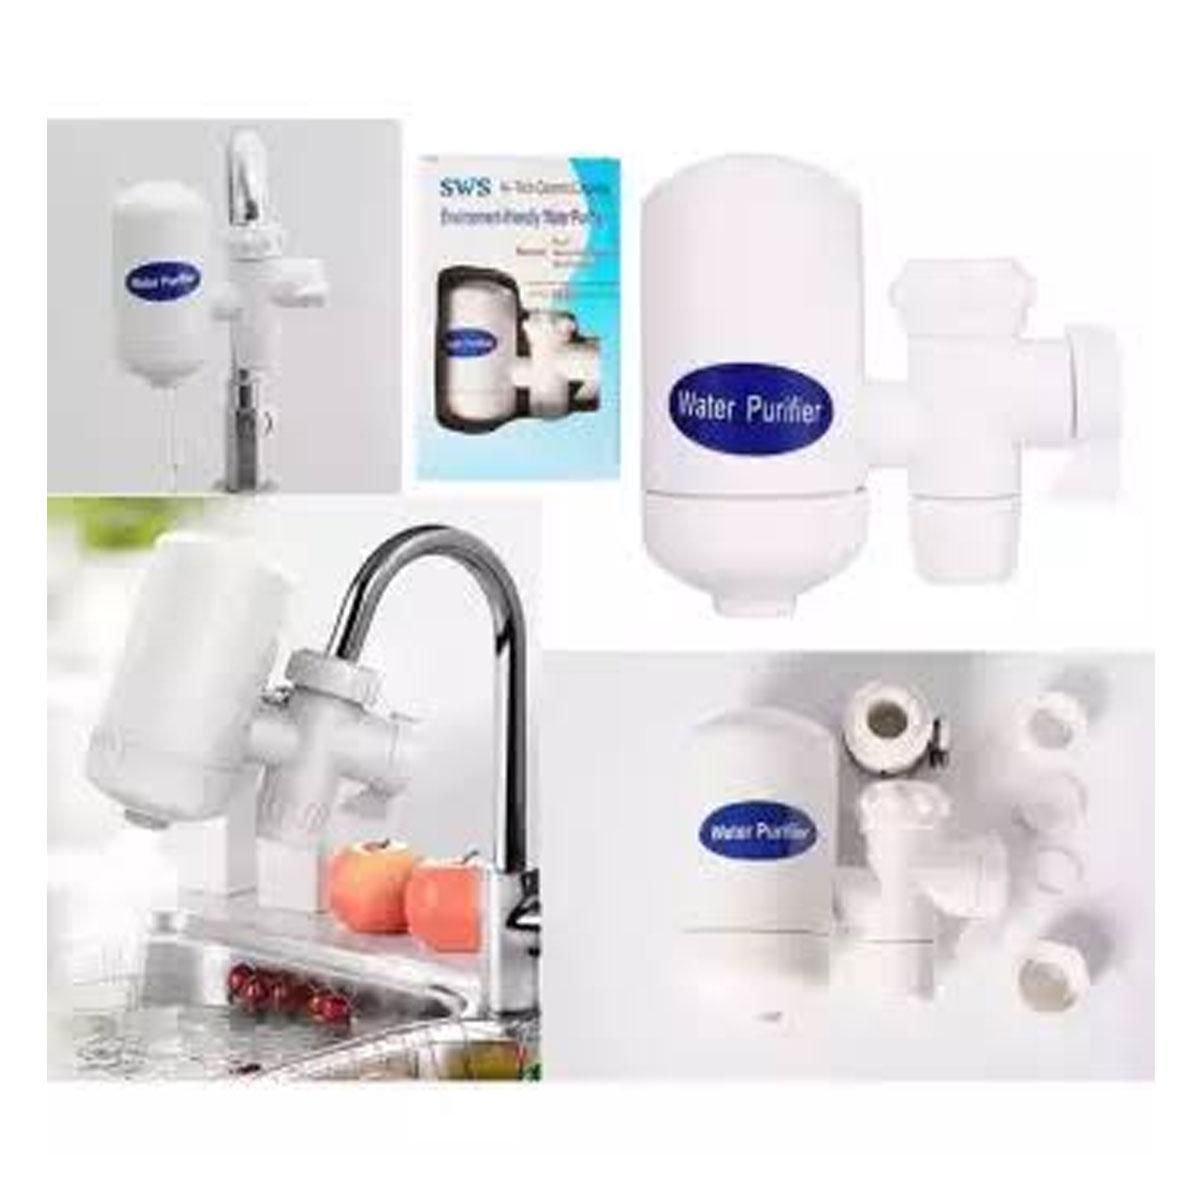 Environment - Friendly Instant Water Purifier For Home & Office Gallery Image 3